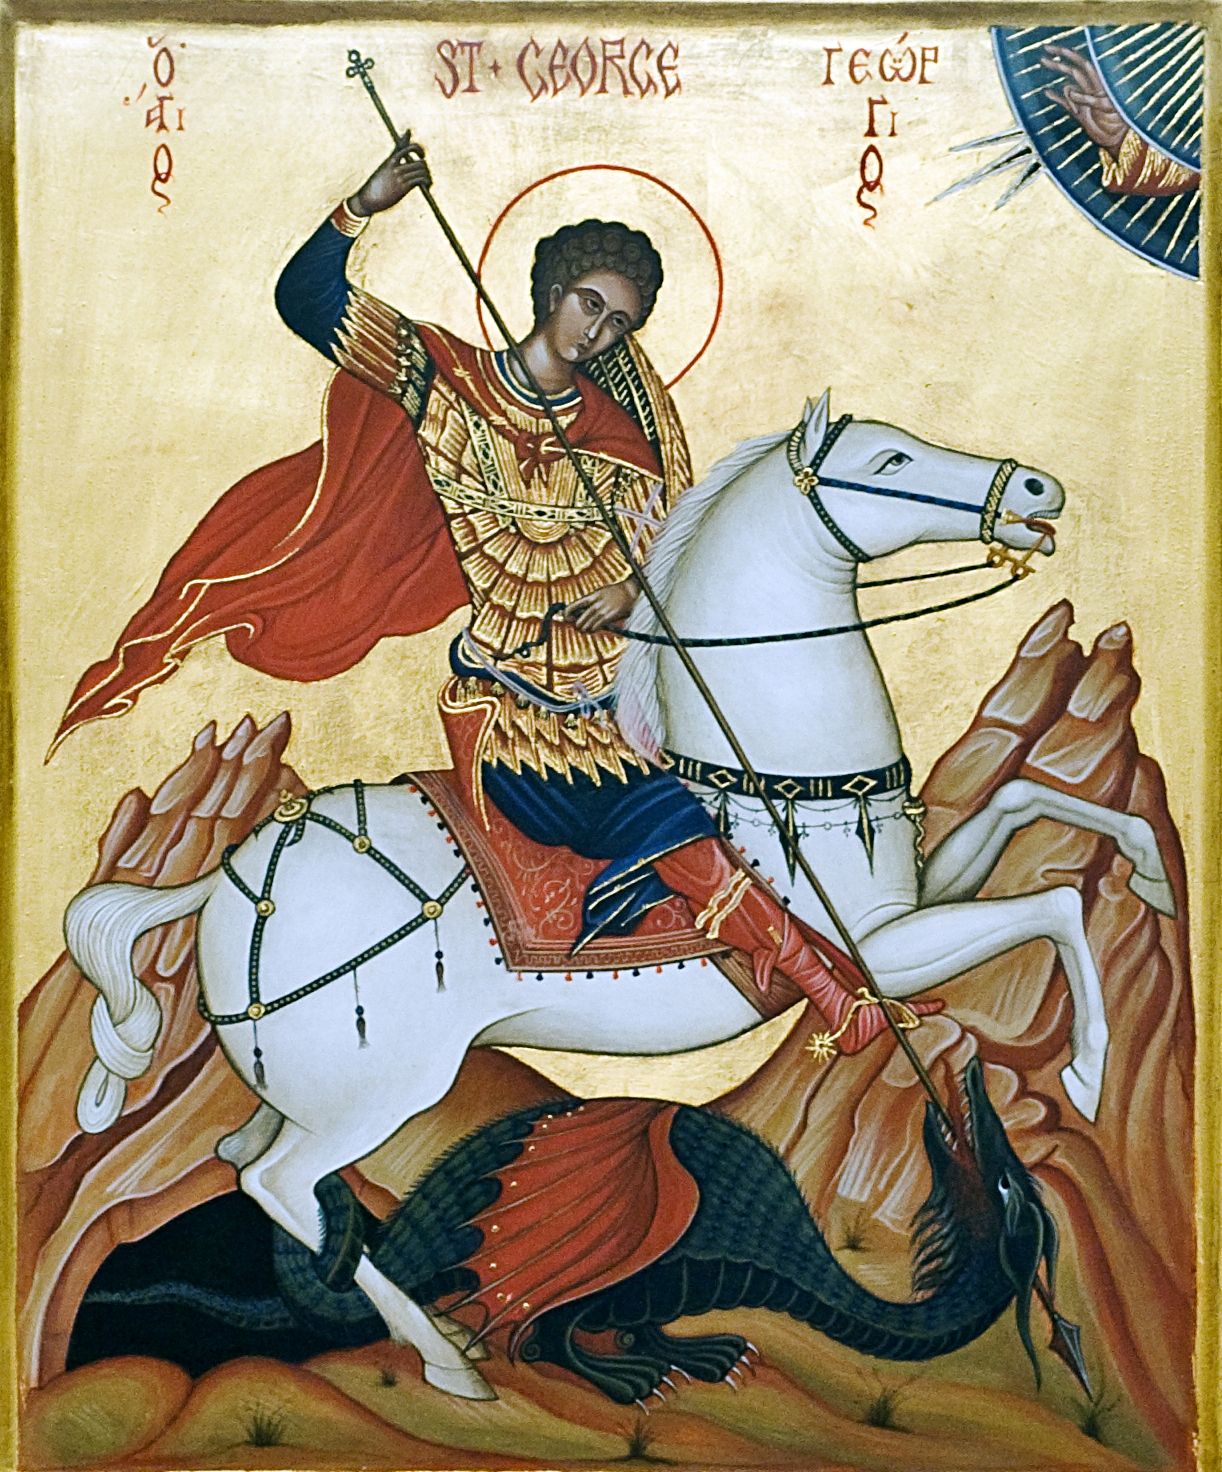 The story of St George and the Dragon